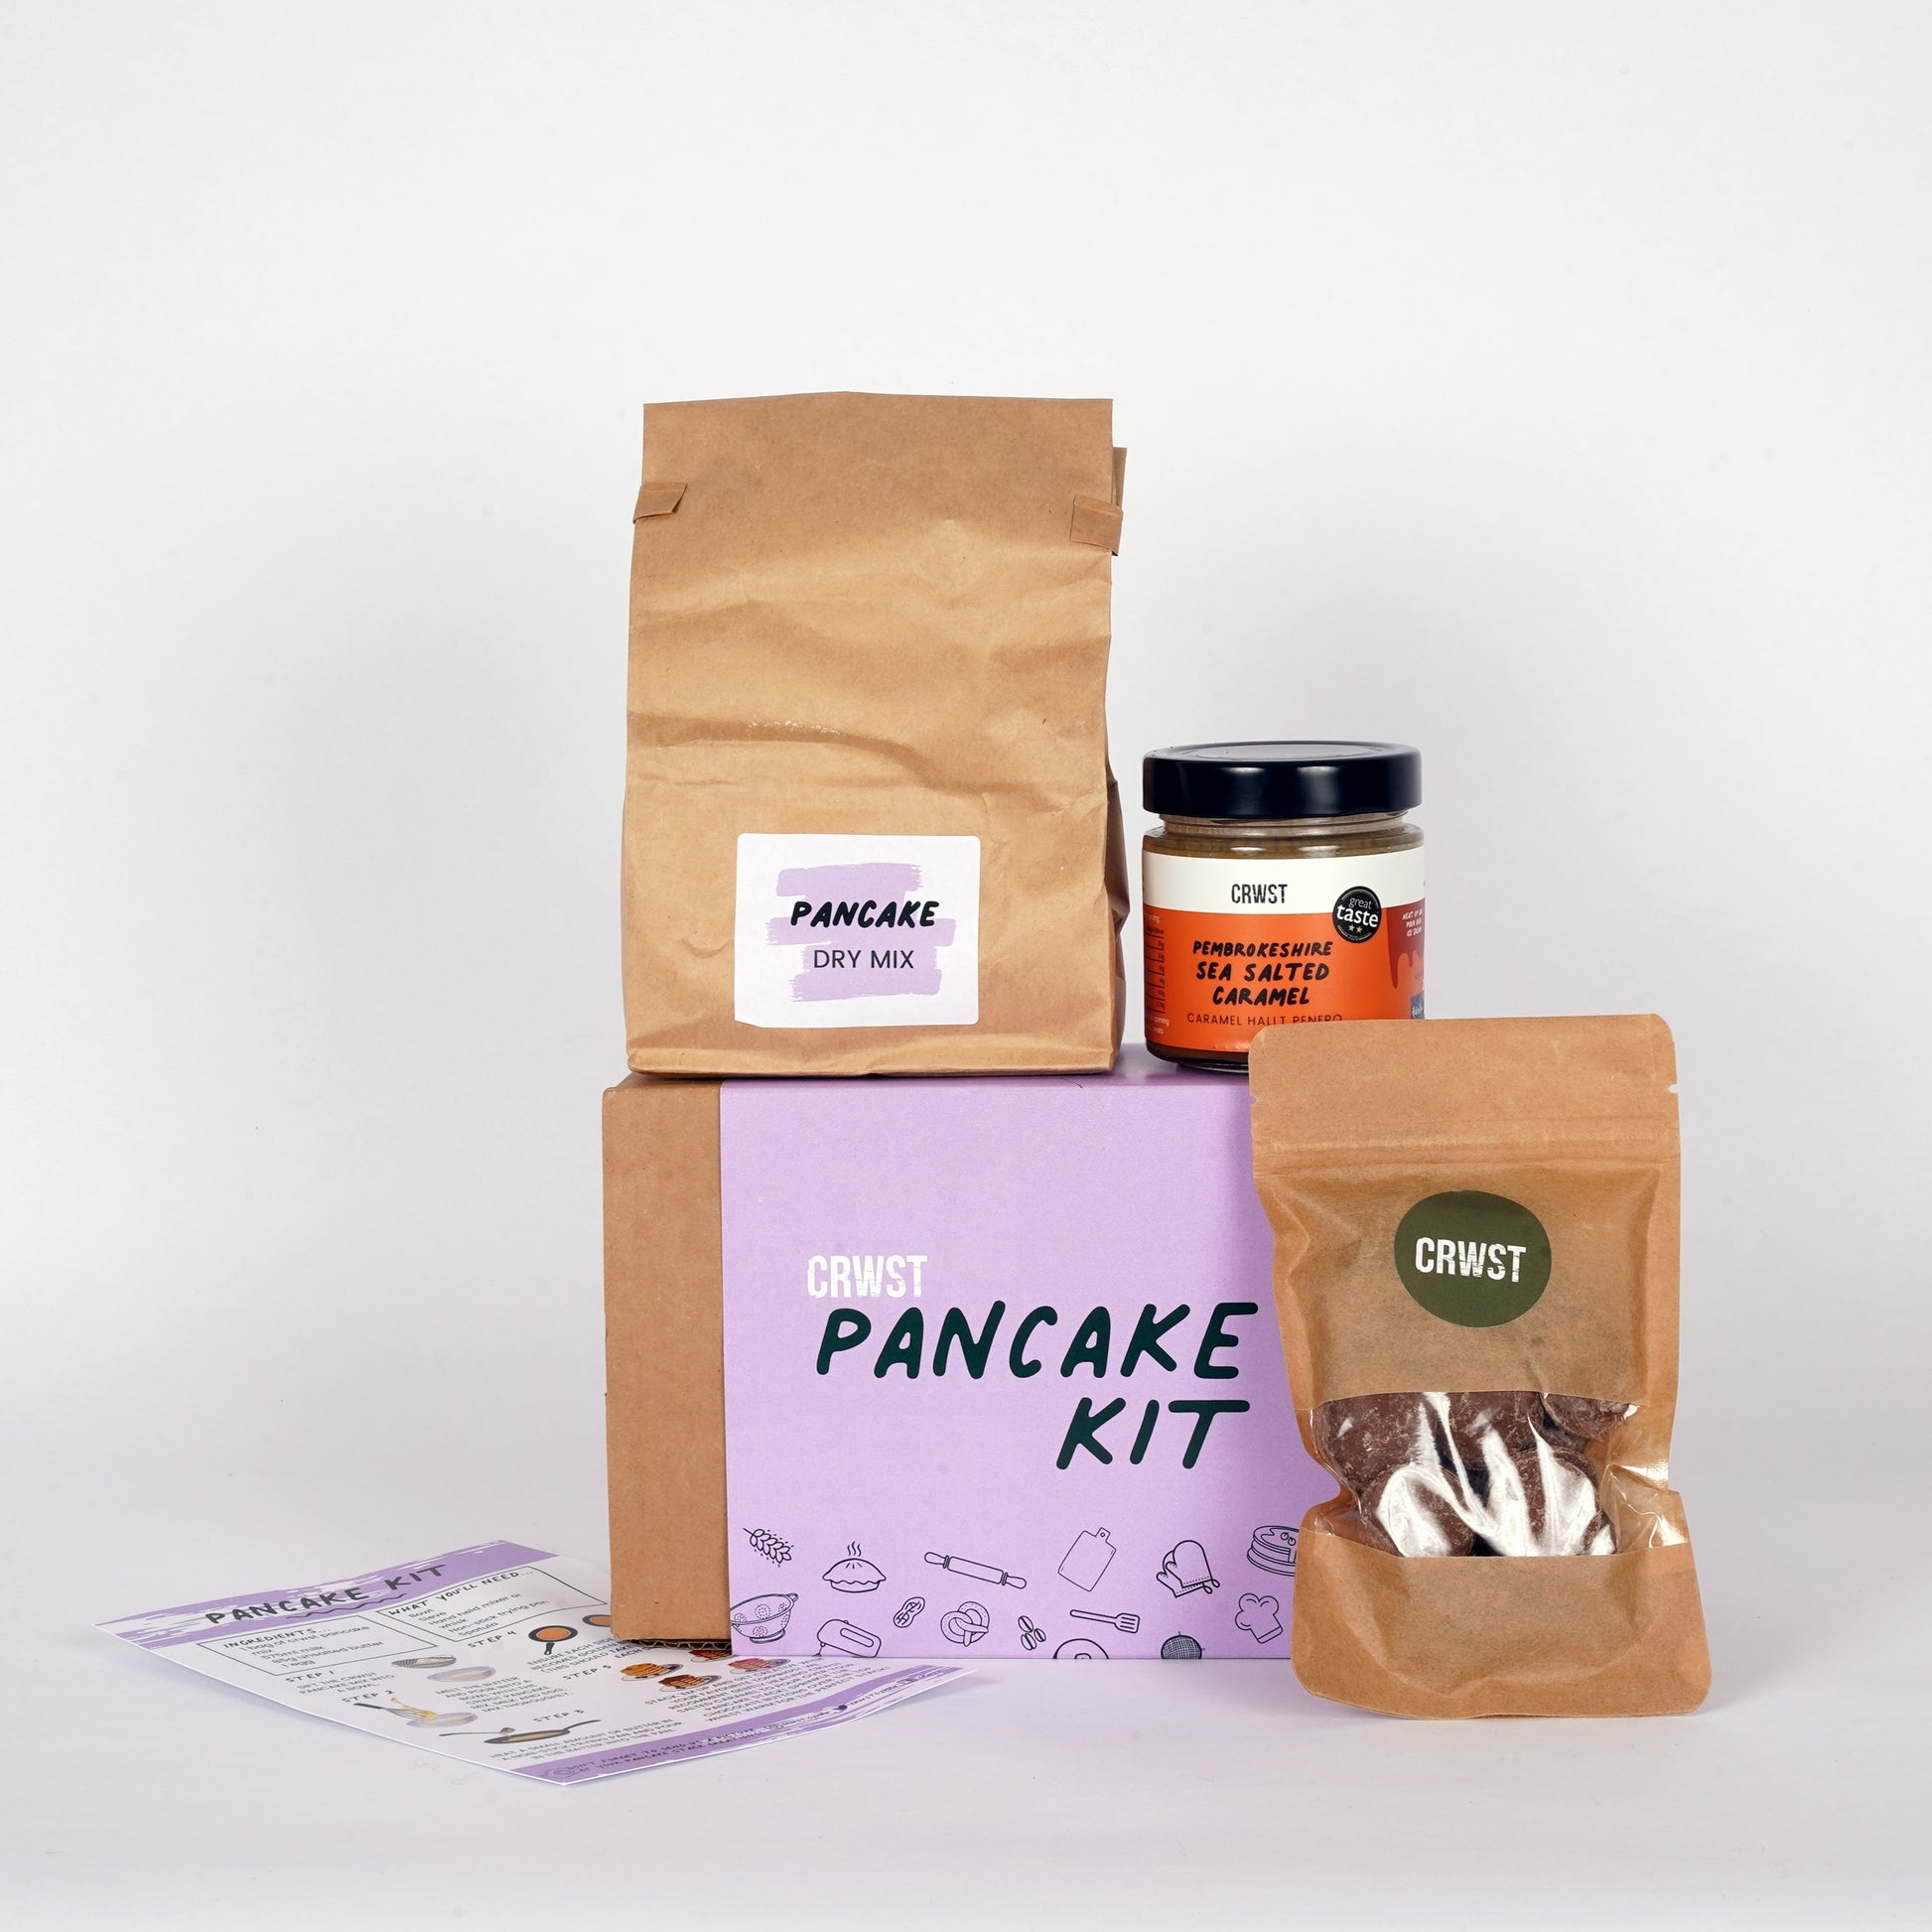 Foodstirs Junk-Free Bakery on X: Thanks @NYMag for featuring our Junk-Free Pancake  Art kit! For full article and more clink the link below!   #bakingkits #foodstirs #nymag   / X